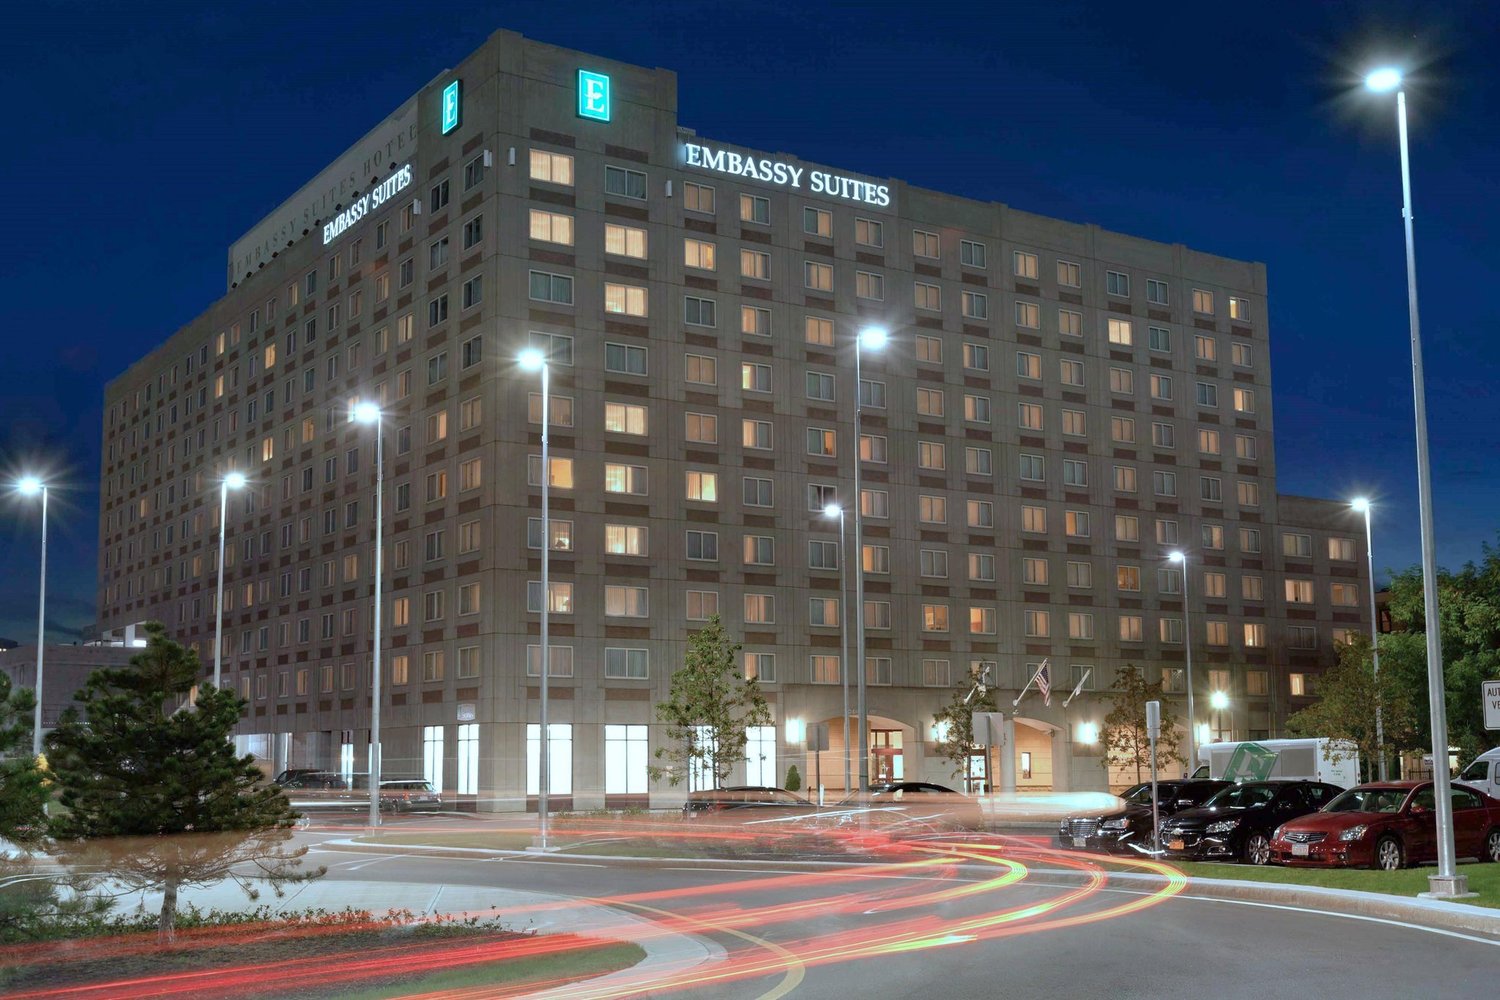 airport hotels in boston